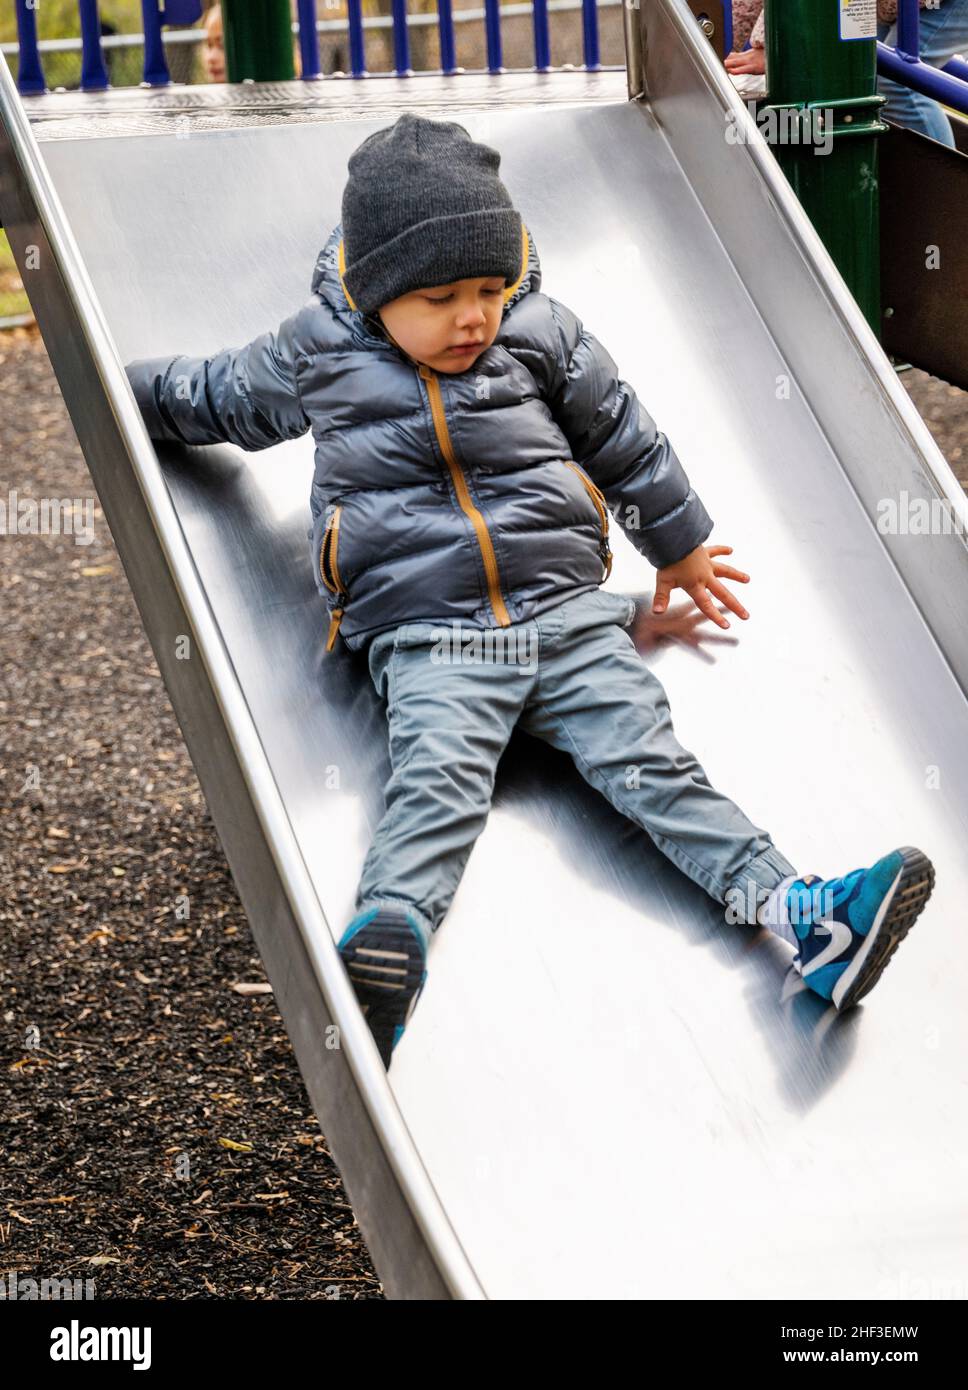 Two year old boy on city playground sliding board Stock Photo